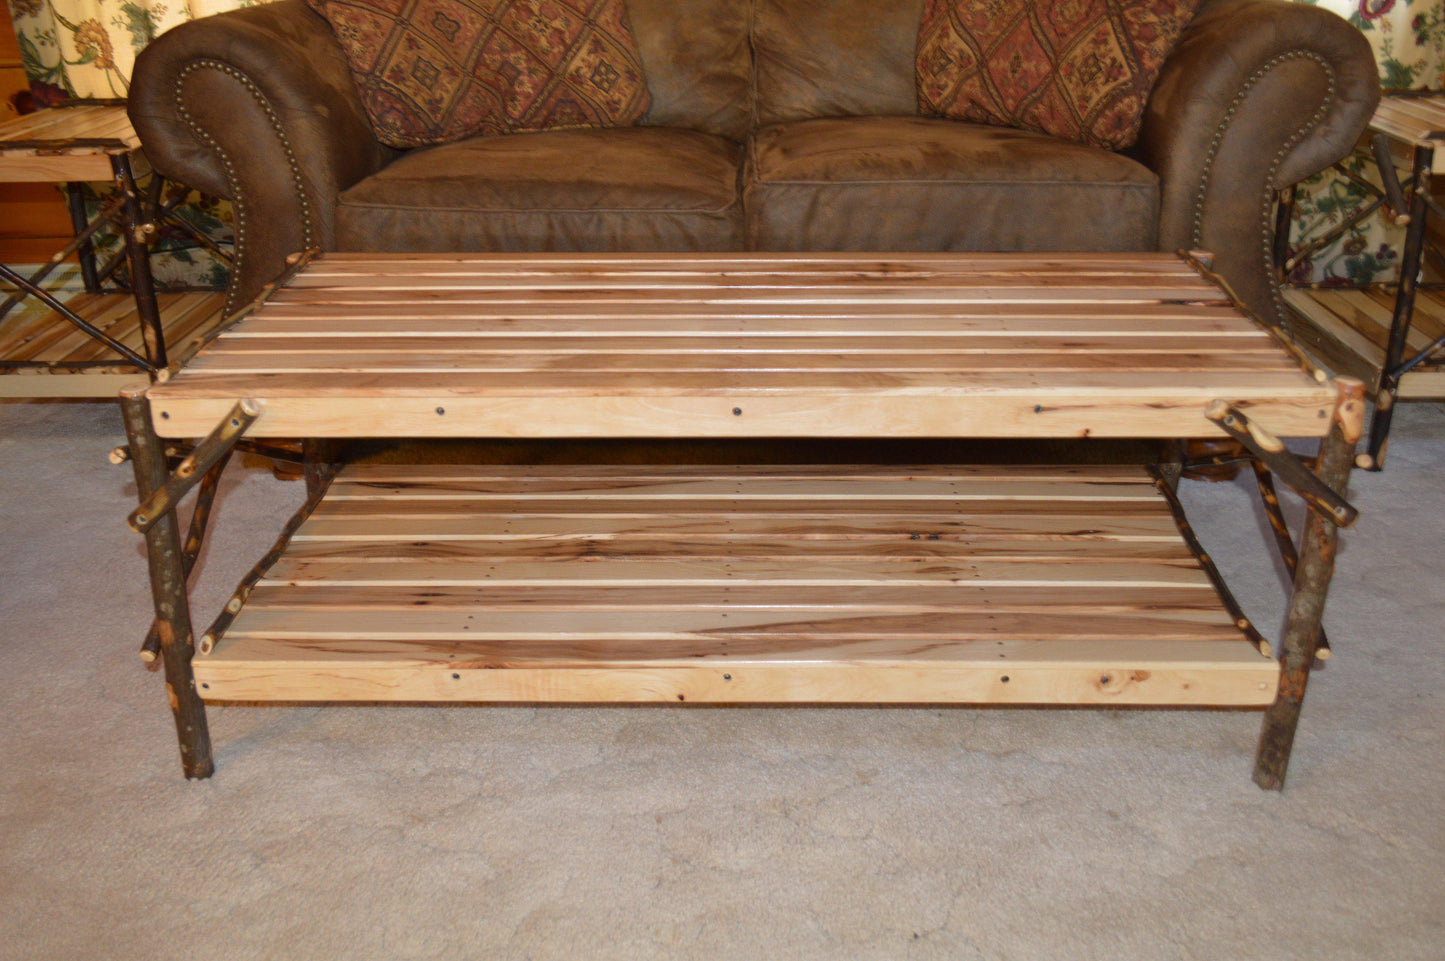 A&L Furniture Co. Amish Hickory Coffee Table with Shelf - LEAD TIME TO SHIP 10 BUSINESS DAYS